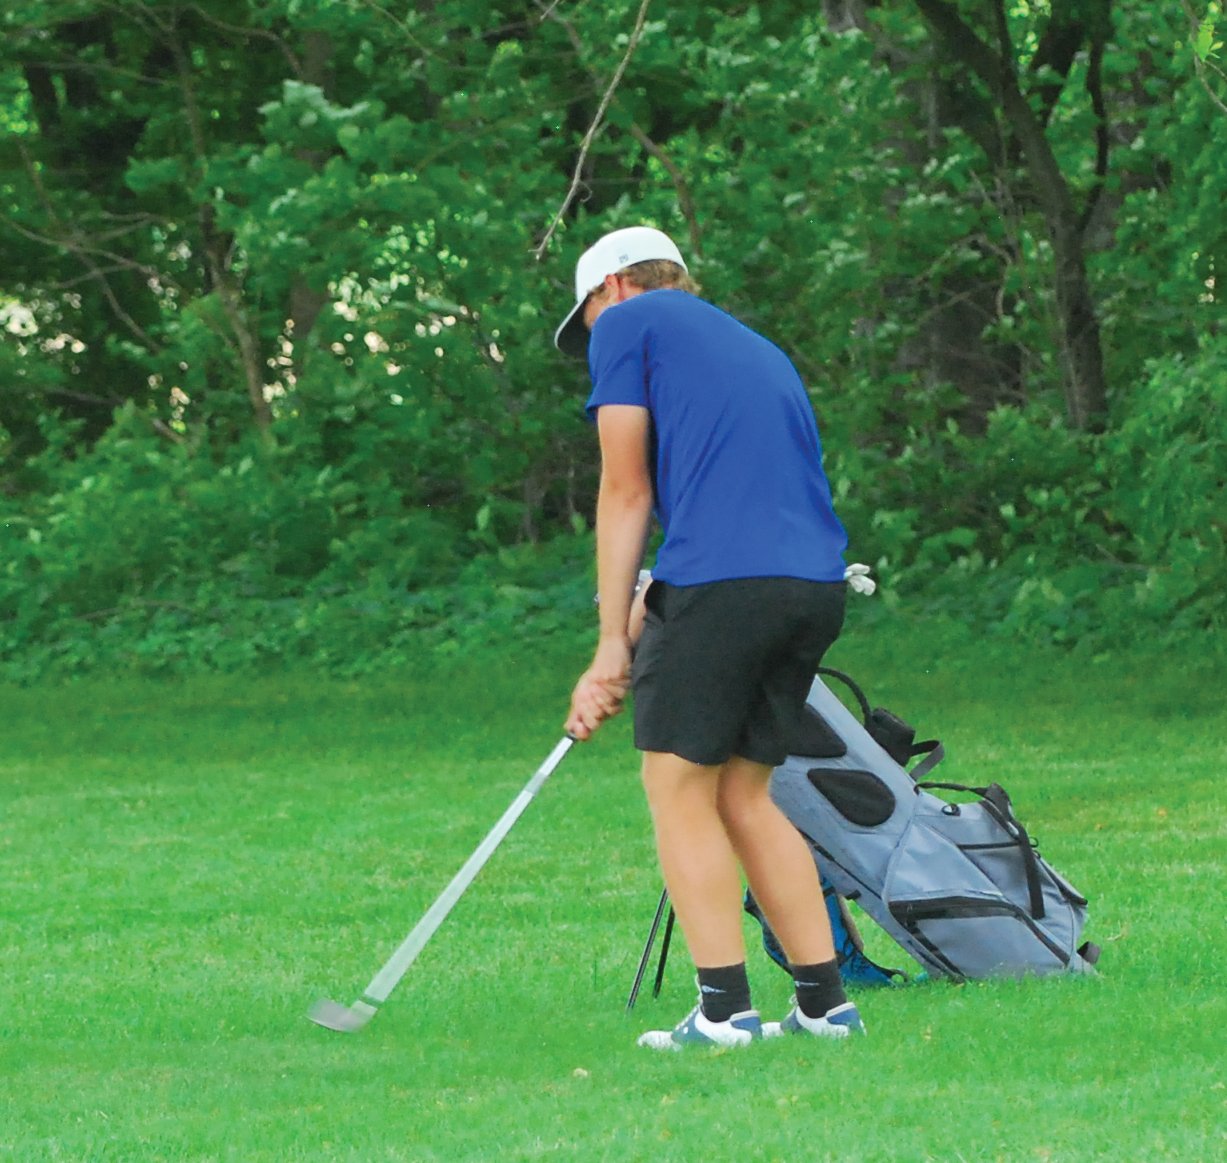 Crawfordsville's Landon Timmons recovers for par on No. 17.